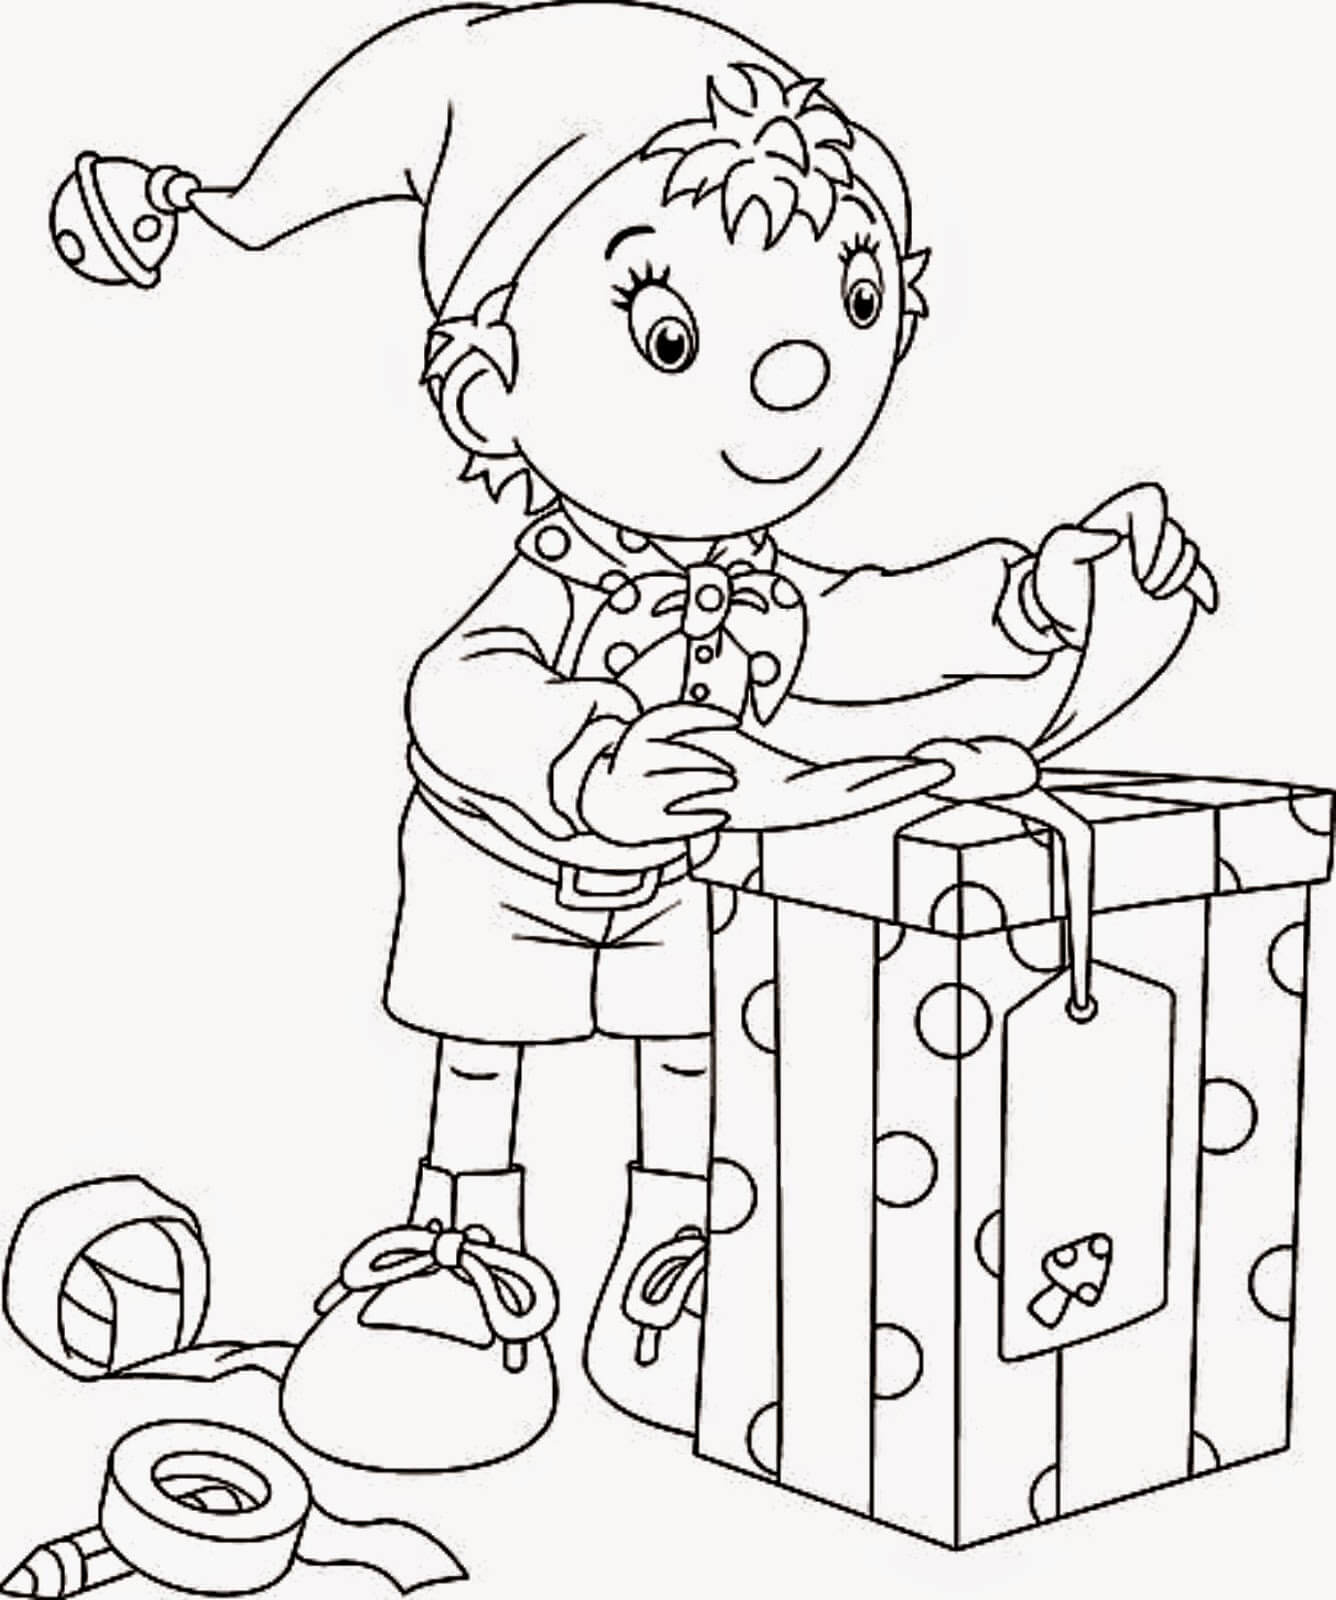 Elf Wrapping Christmas Gifts Coloring Page